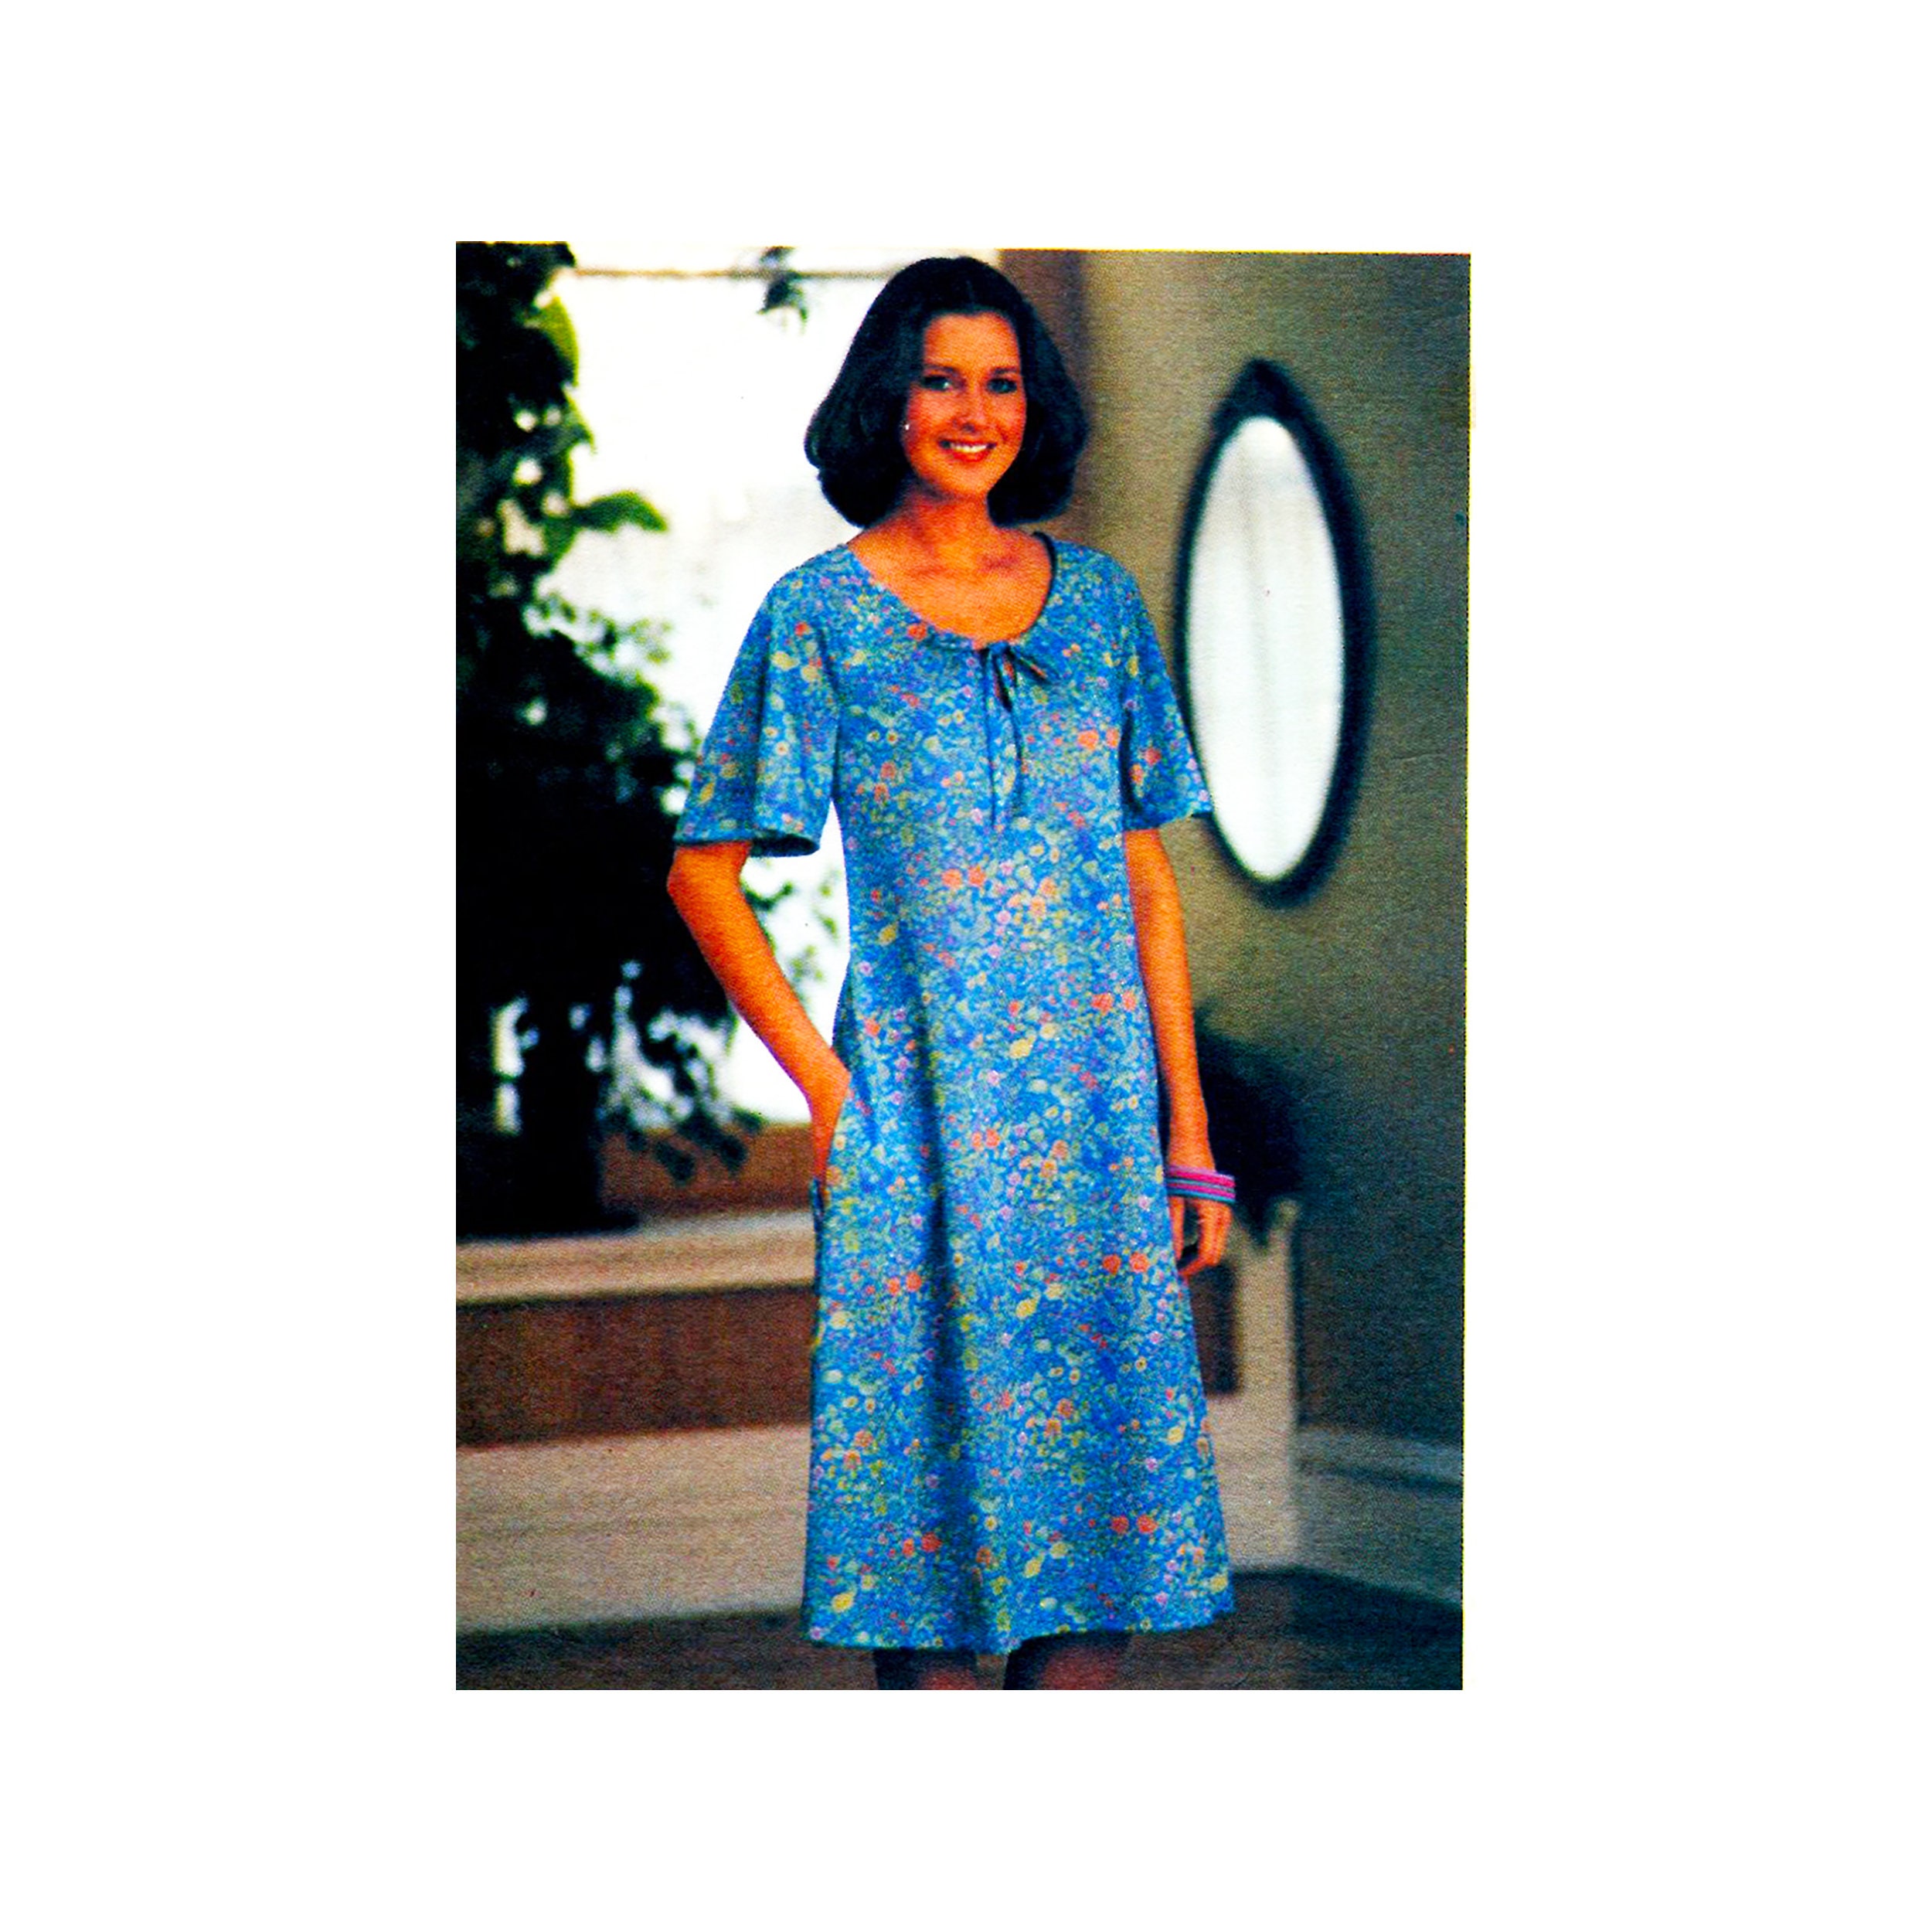 SEWING PATTERN Sew Women Clothes Dress Easy Simple Learn To Sew Petite Plus  7561